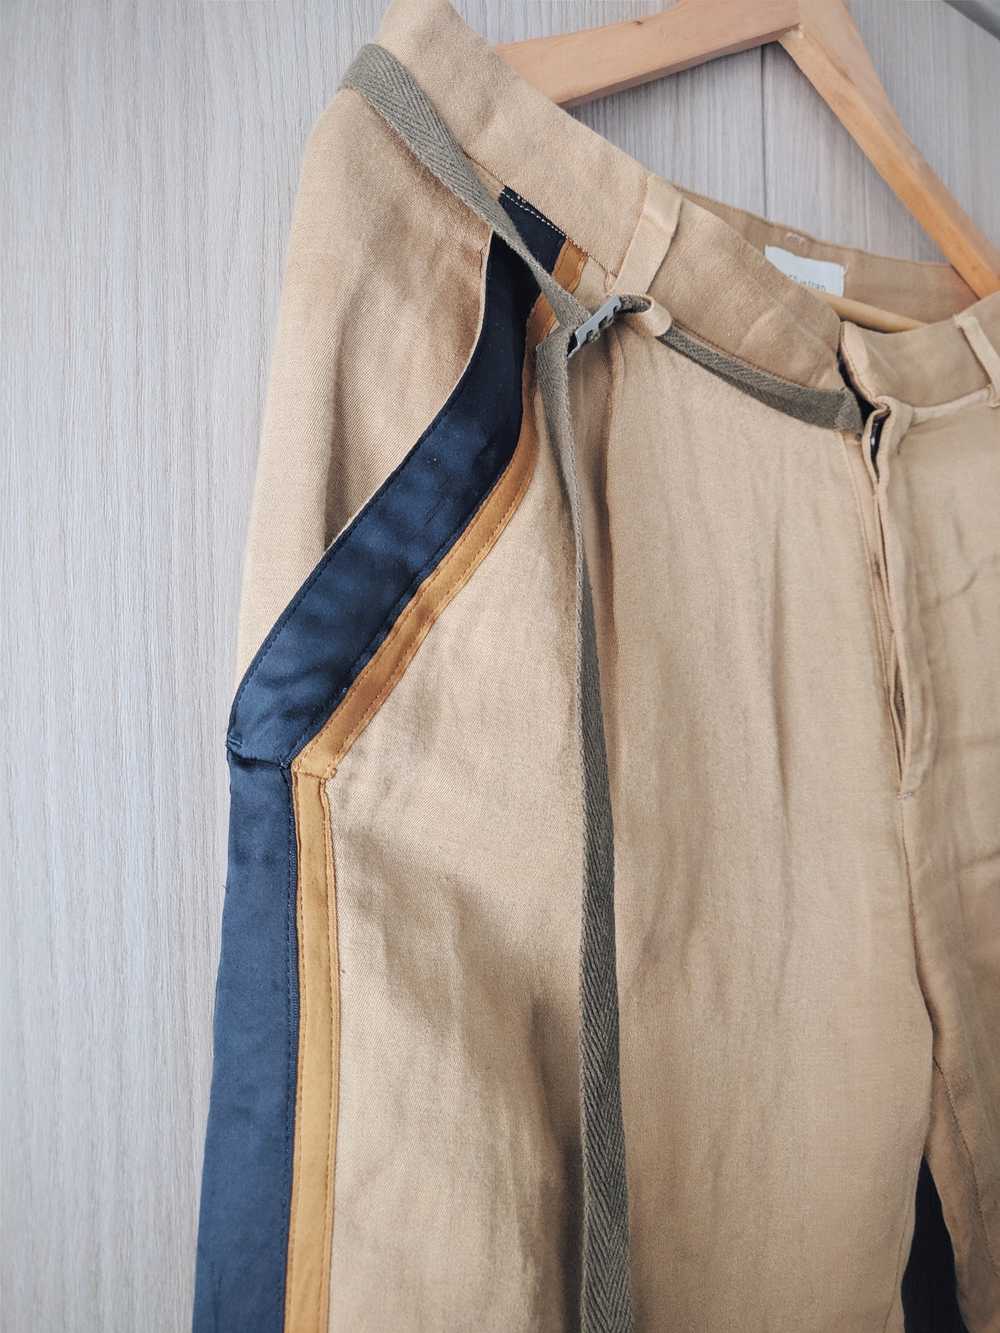 Bed J W Ford SS16 Sailor Trousers - image 3